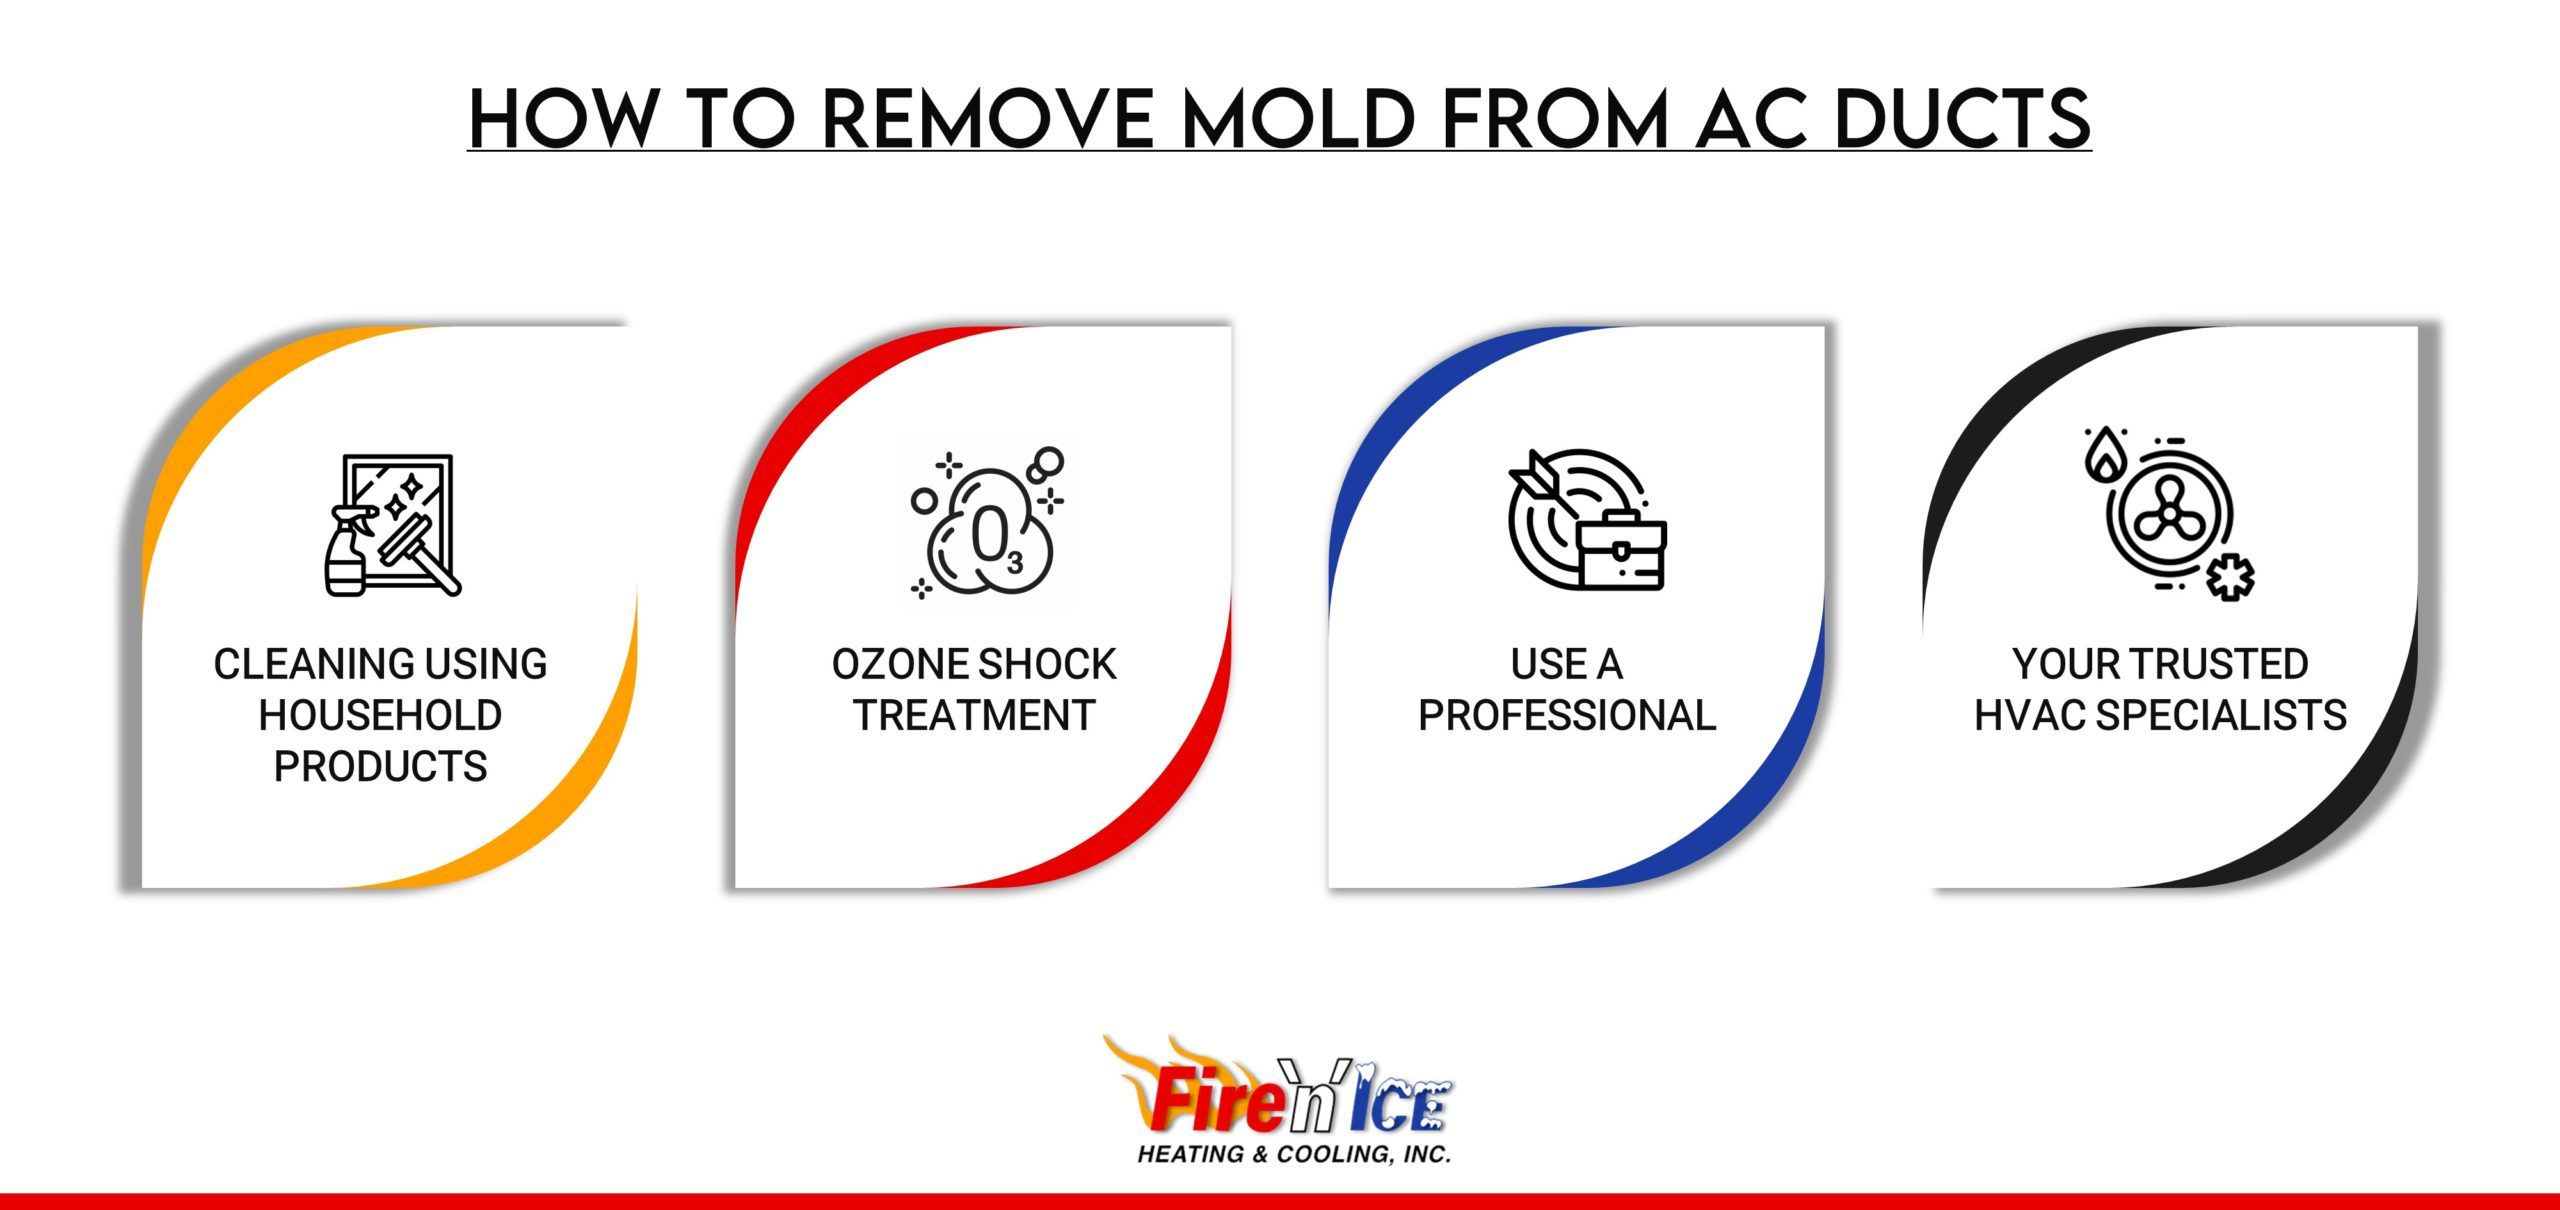 How to remove mold from air ducts